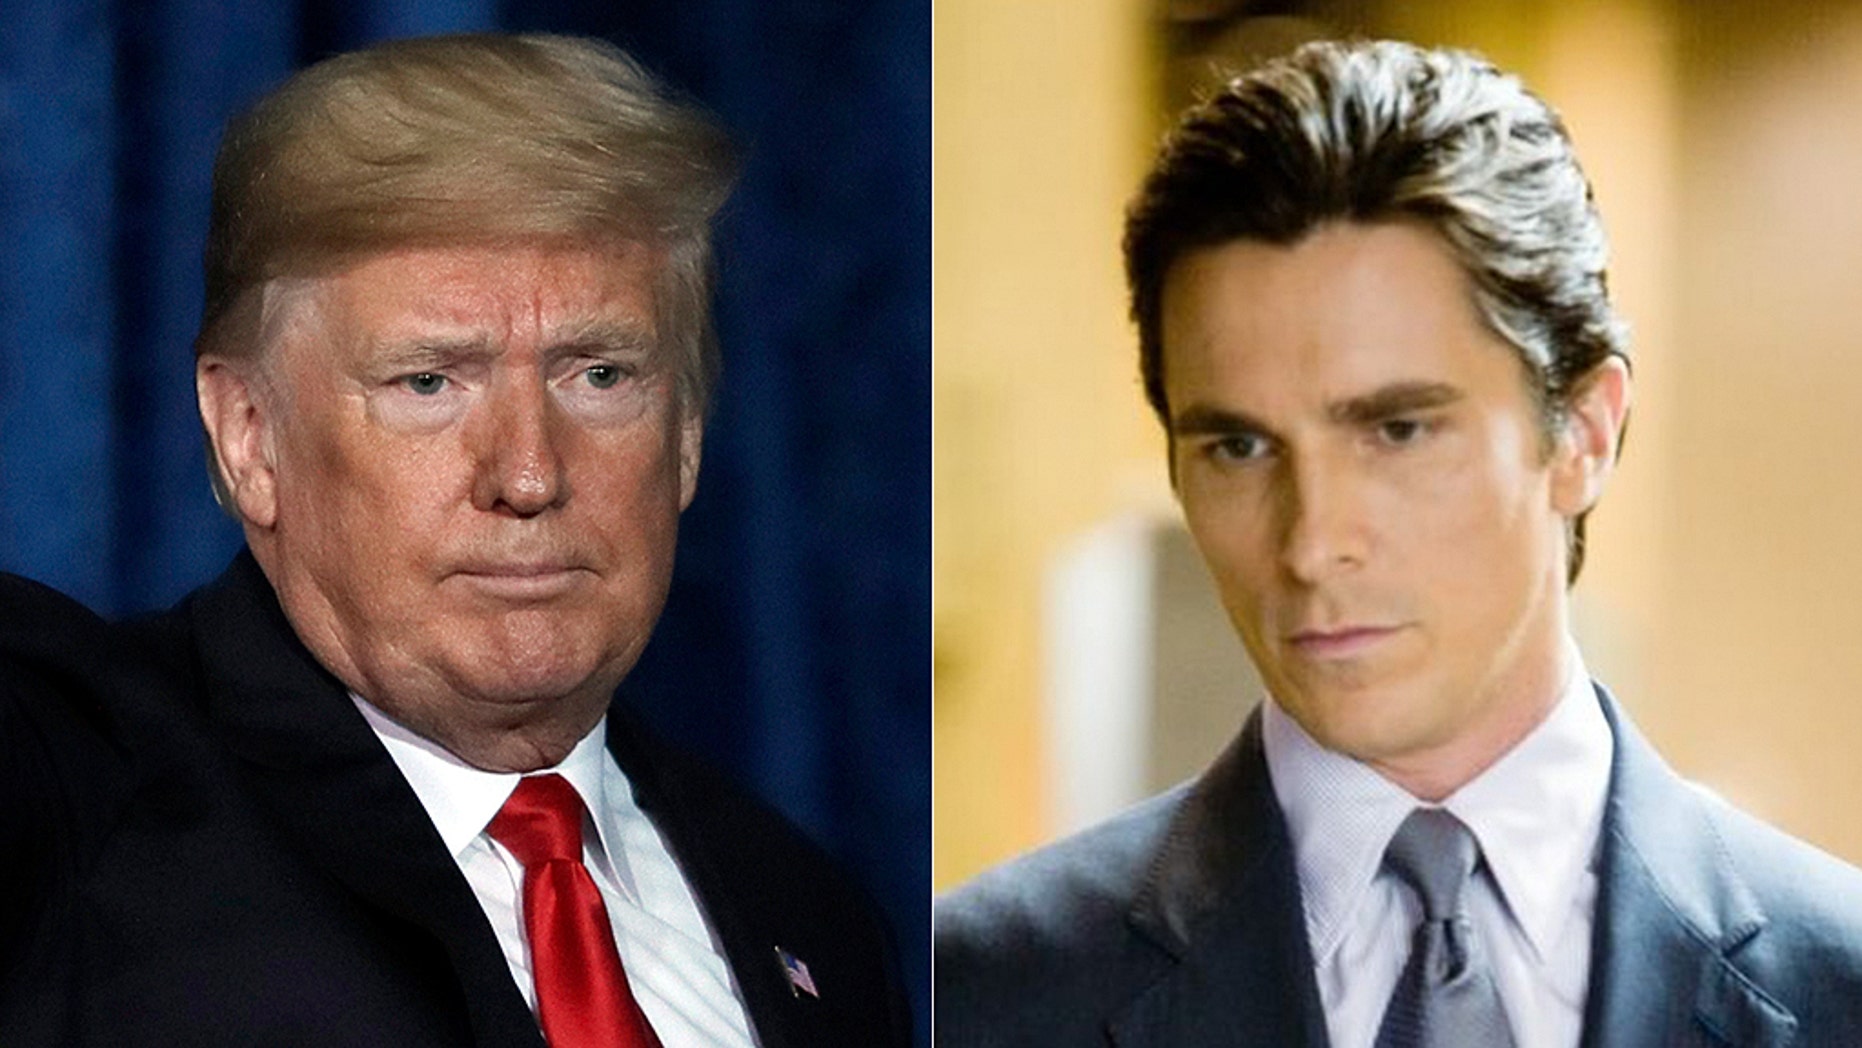 Christian Bale compares Trump to a ‘clown,’ says ‘clowns can do a lot of damage’